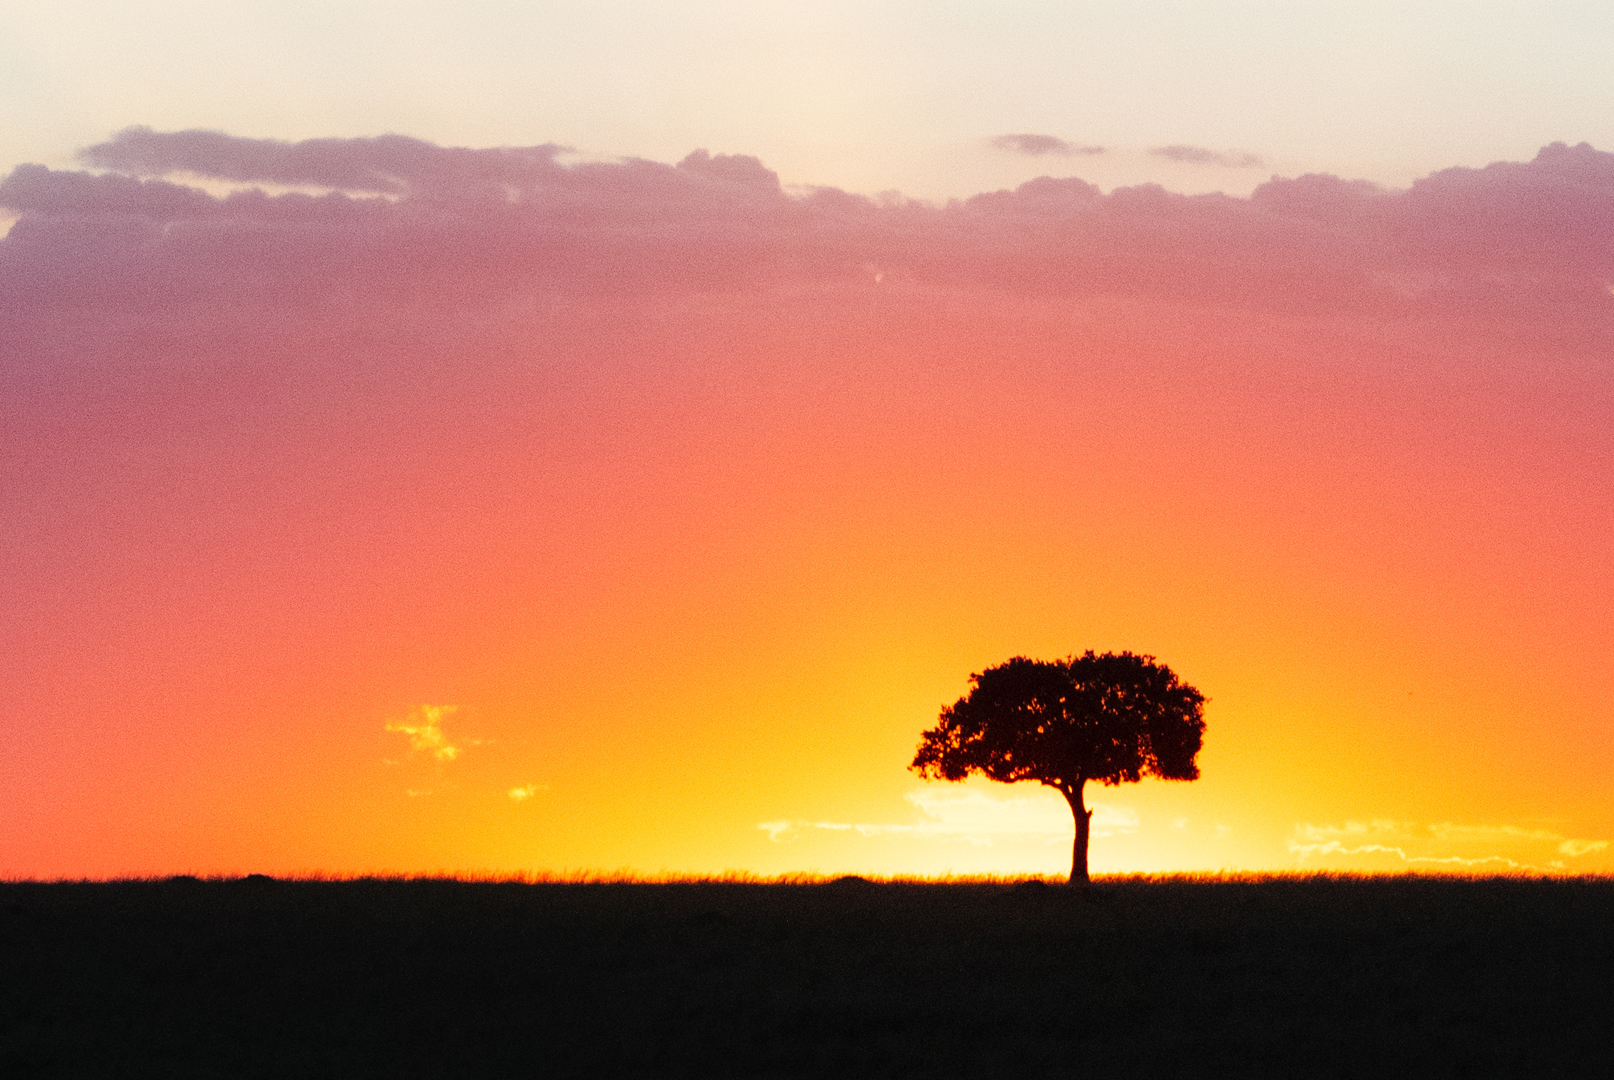 Solitary Tree Silhouette at Colorful African Sunset.jpg